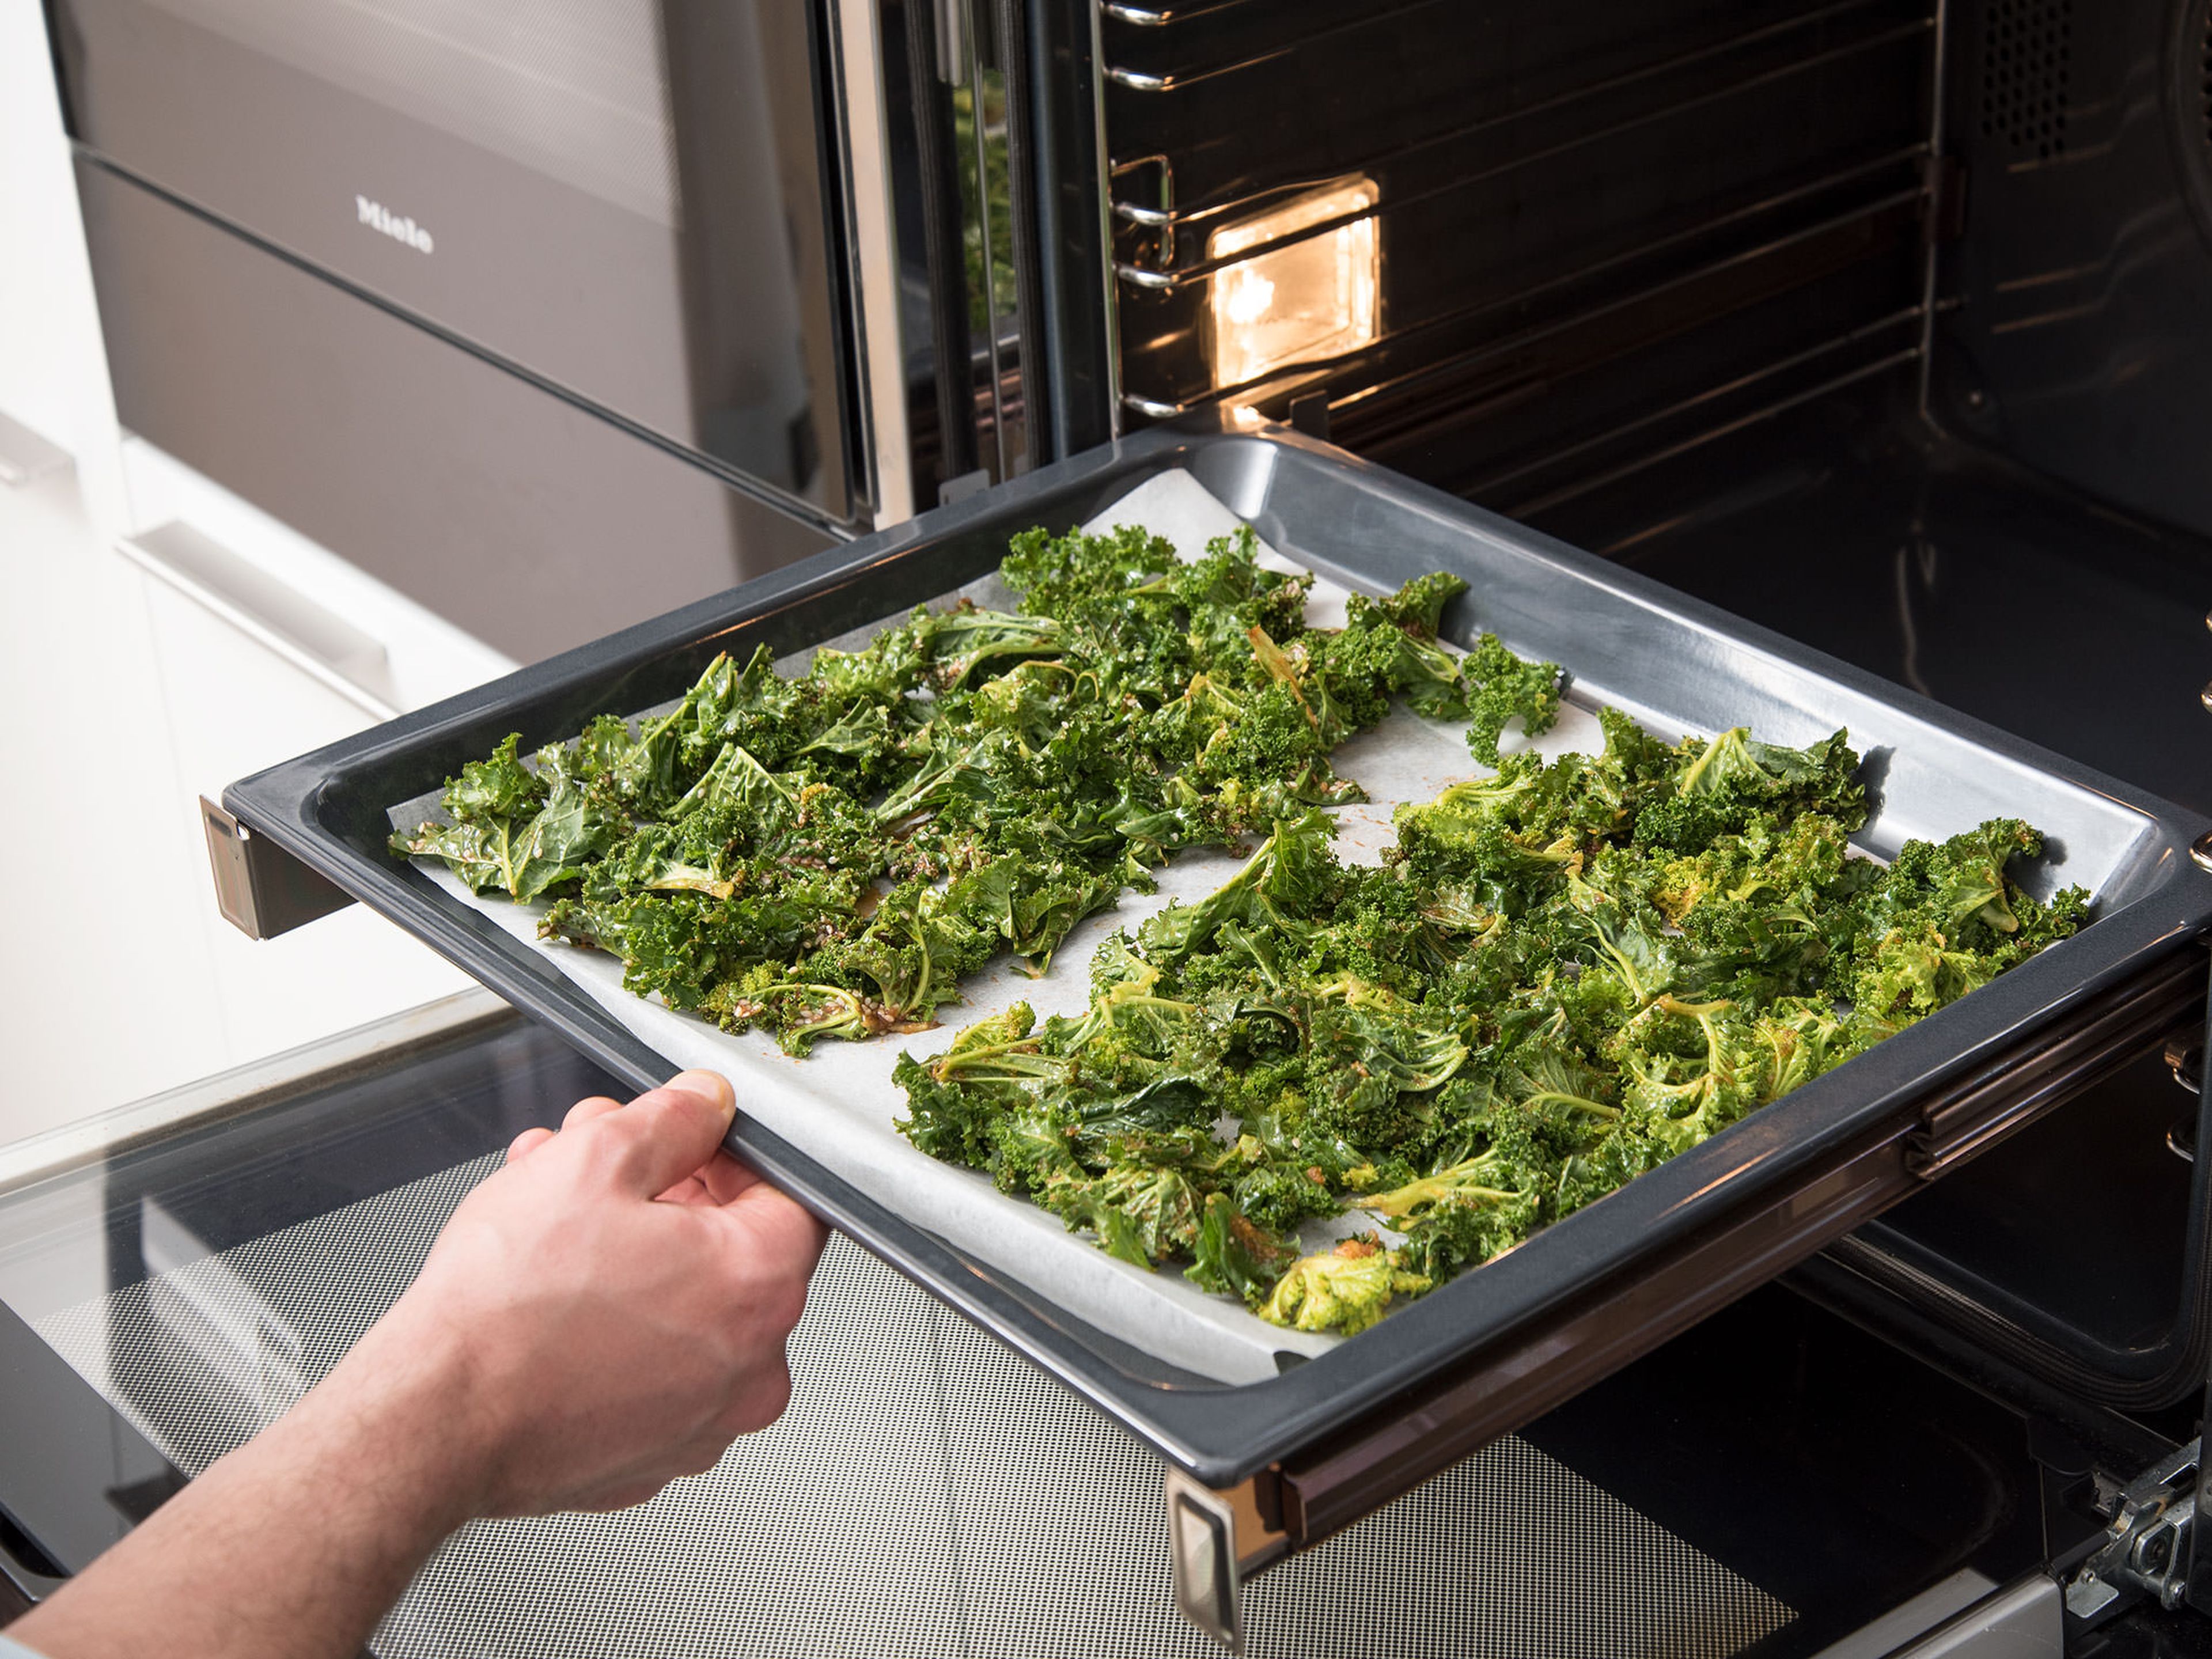 Spread the kale evenly on a parchment-lined baking sheet in one layer. Bake at 100°C/200°F for approx. 30 min. or until kale is crispy and slightly brown. Remove from oven and allow to cool completely. Enjoy!